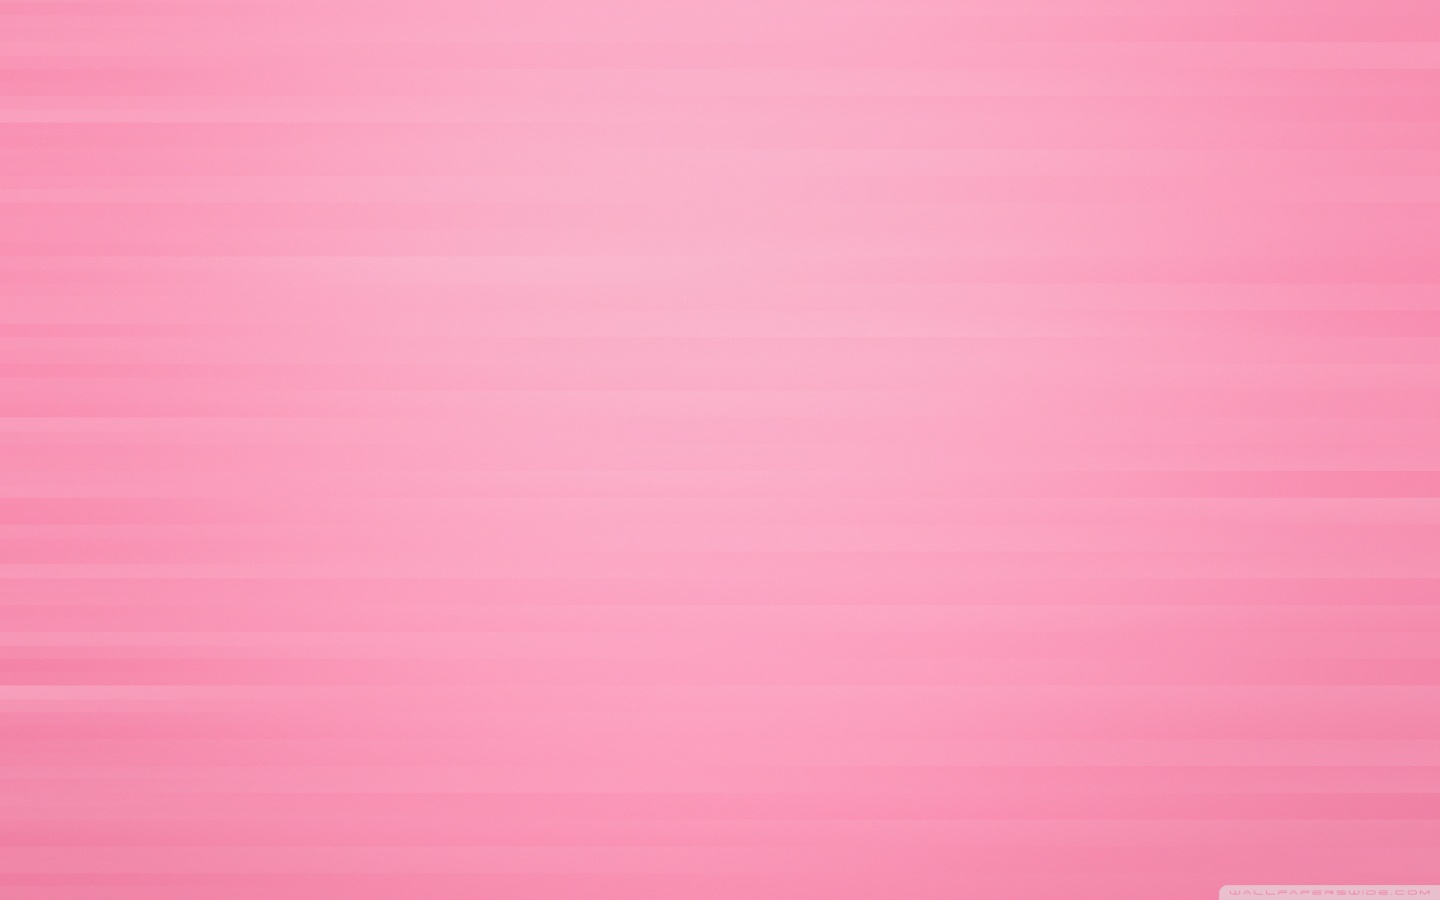 Download Pink Stripes Background UltraHD Wallpaper - Wallpapers Printed